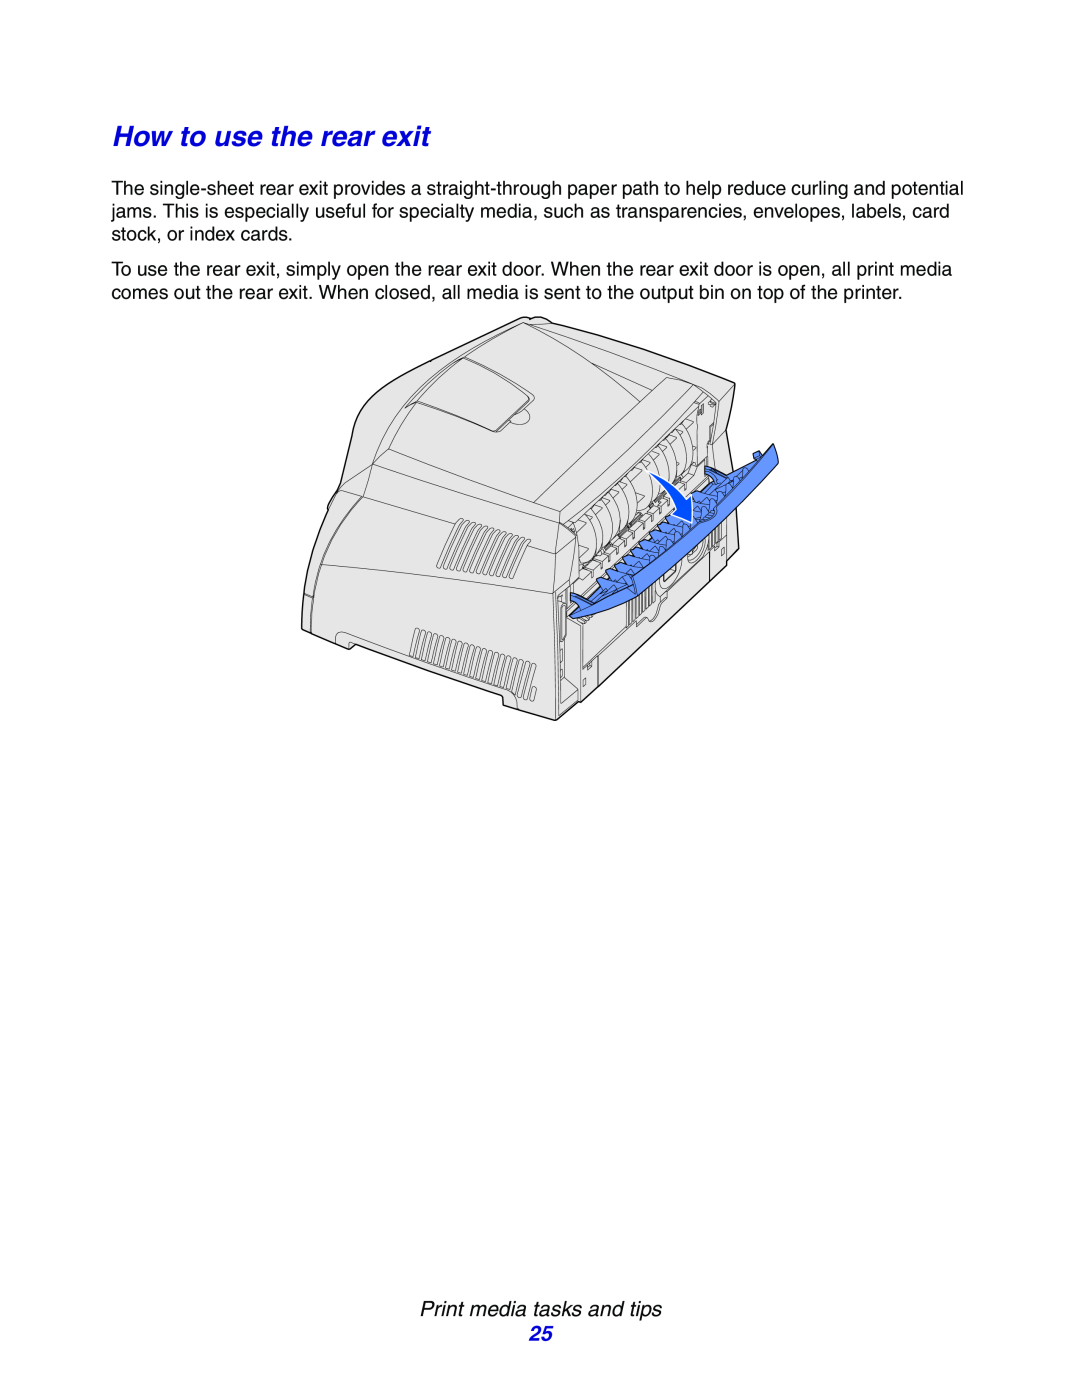 Lexmark E234N manual How to use the rear exit, Print media tasks and tips 